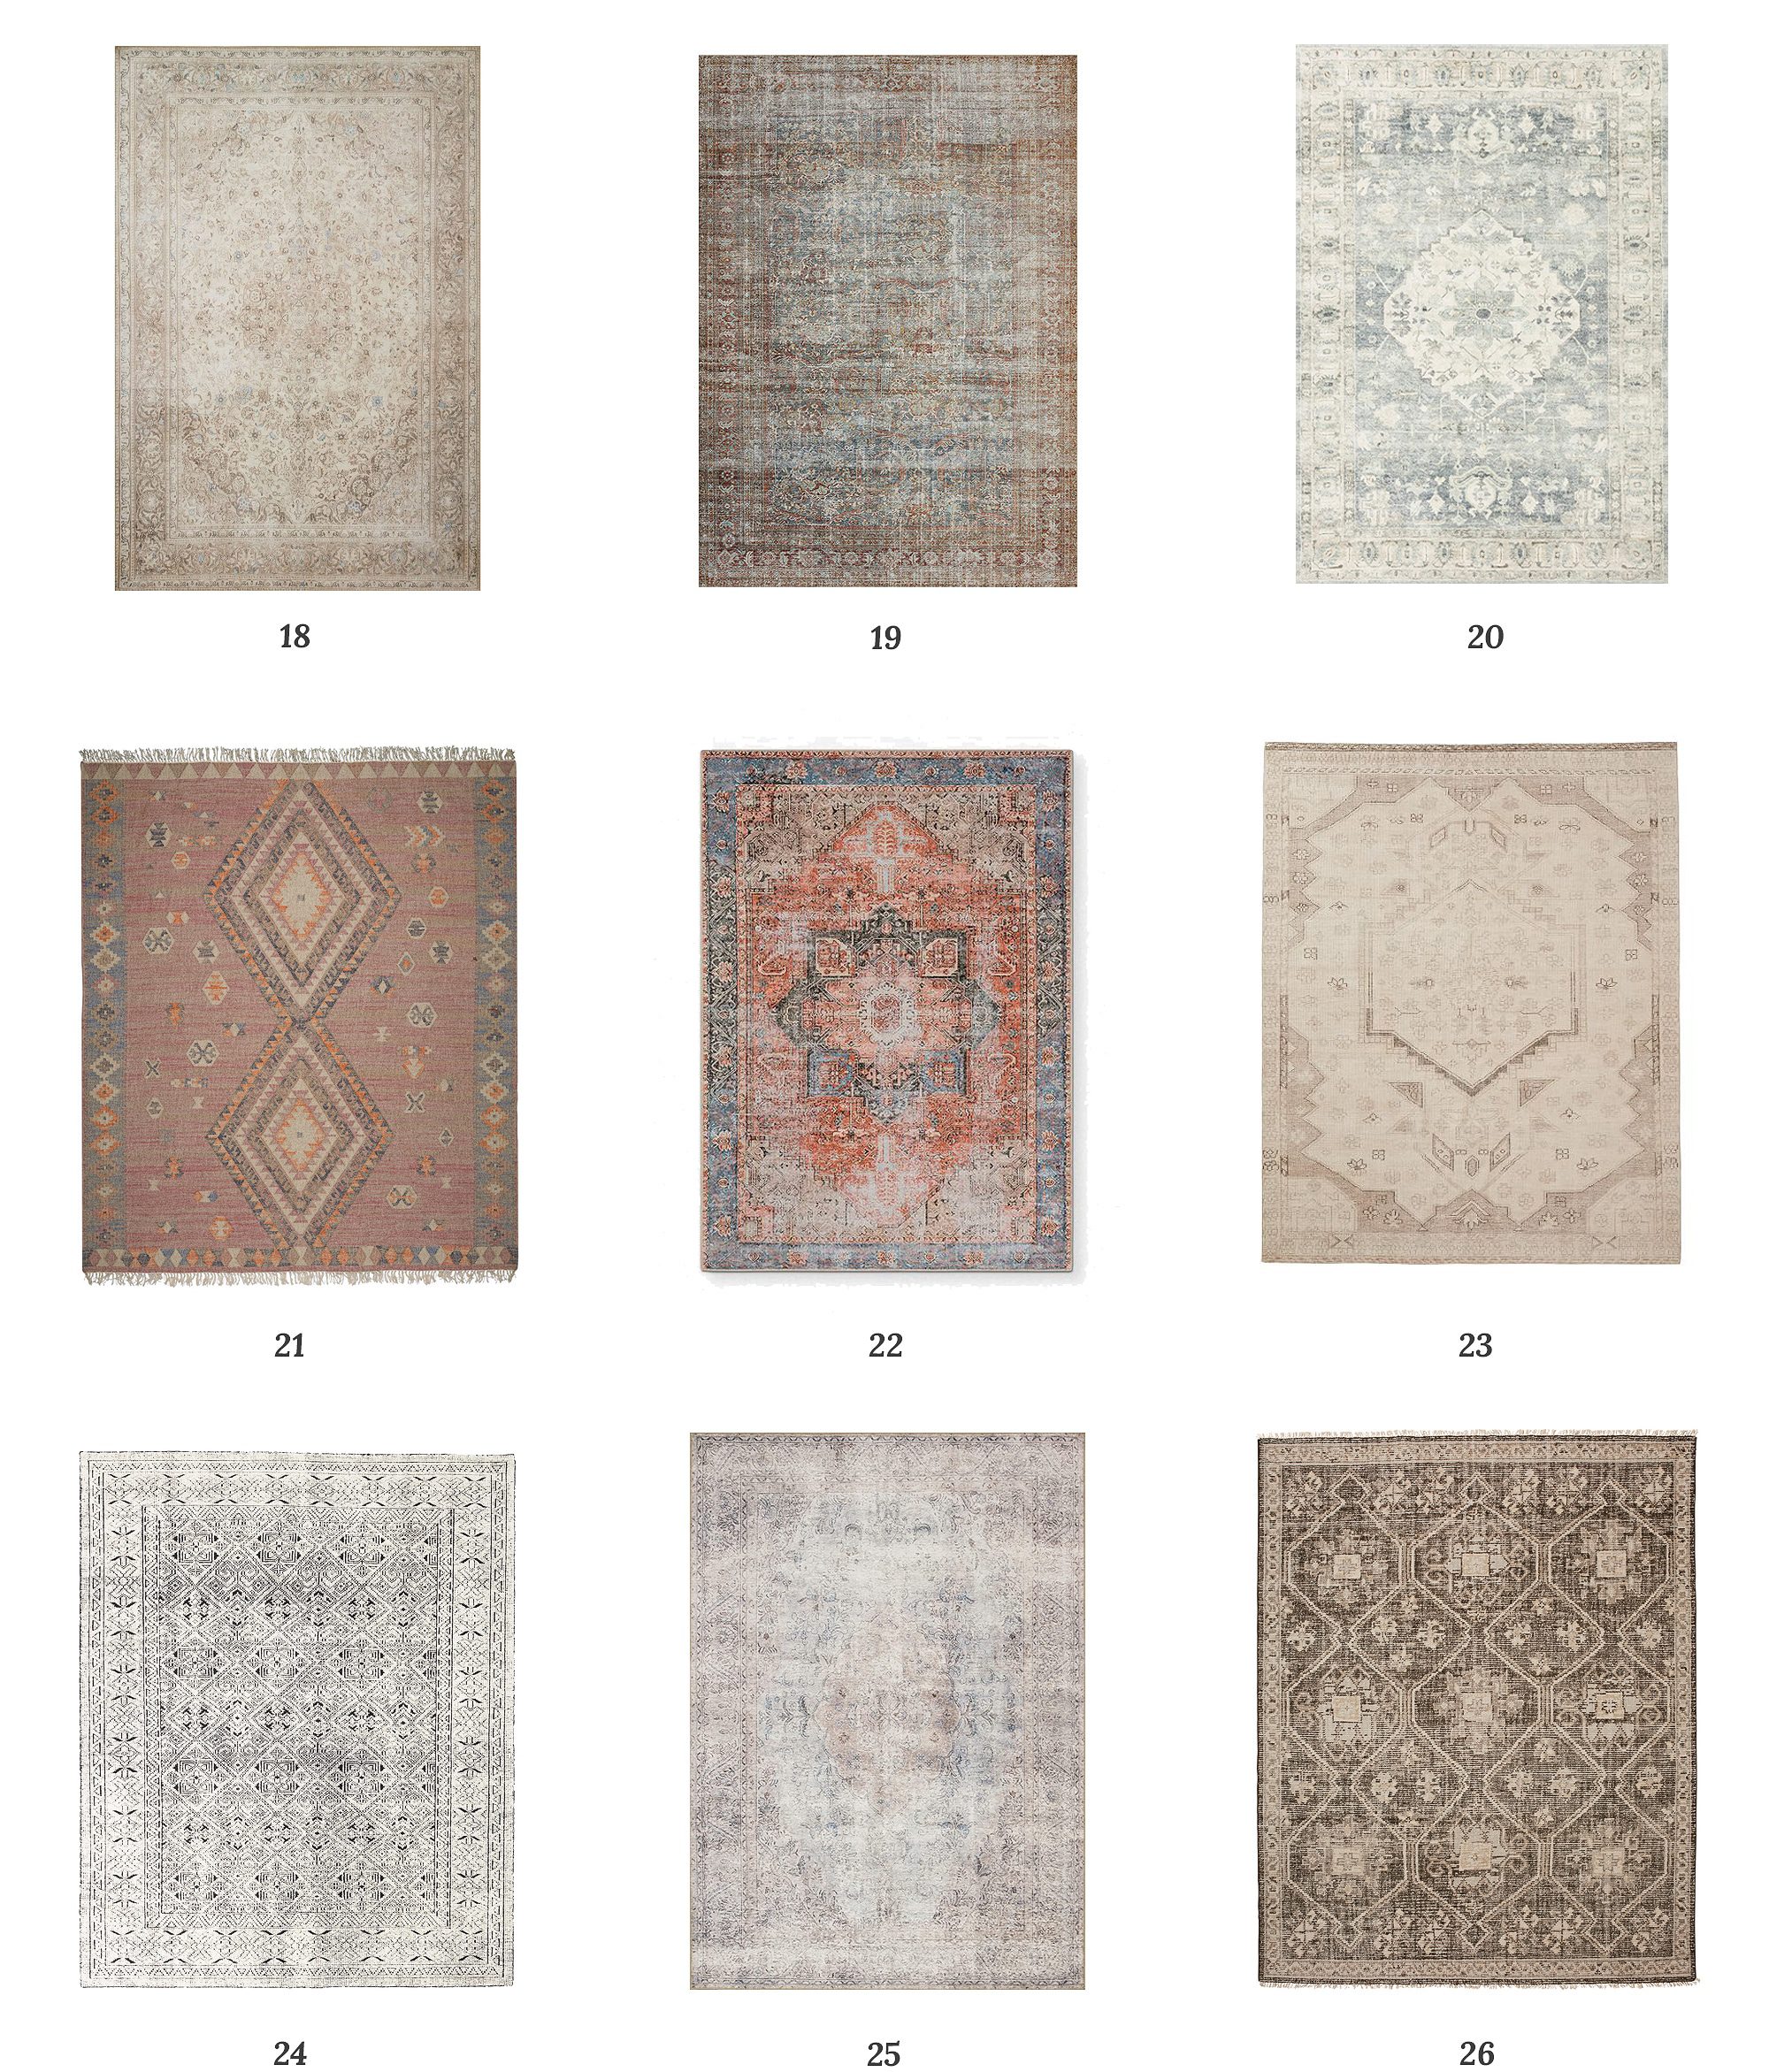 Faux Vintage Rug Round-Up! | via Yellow Brick Home